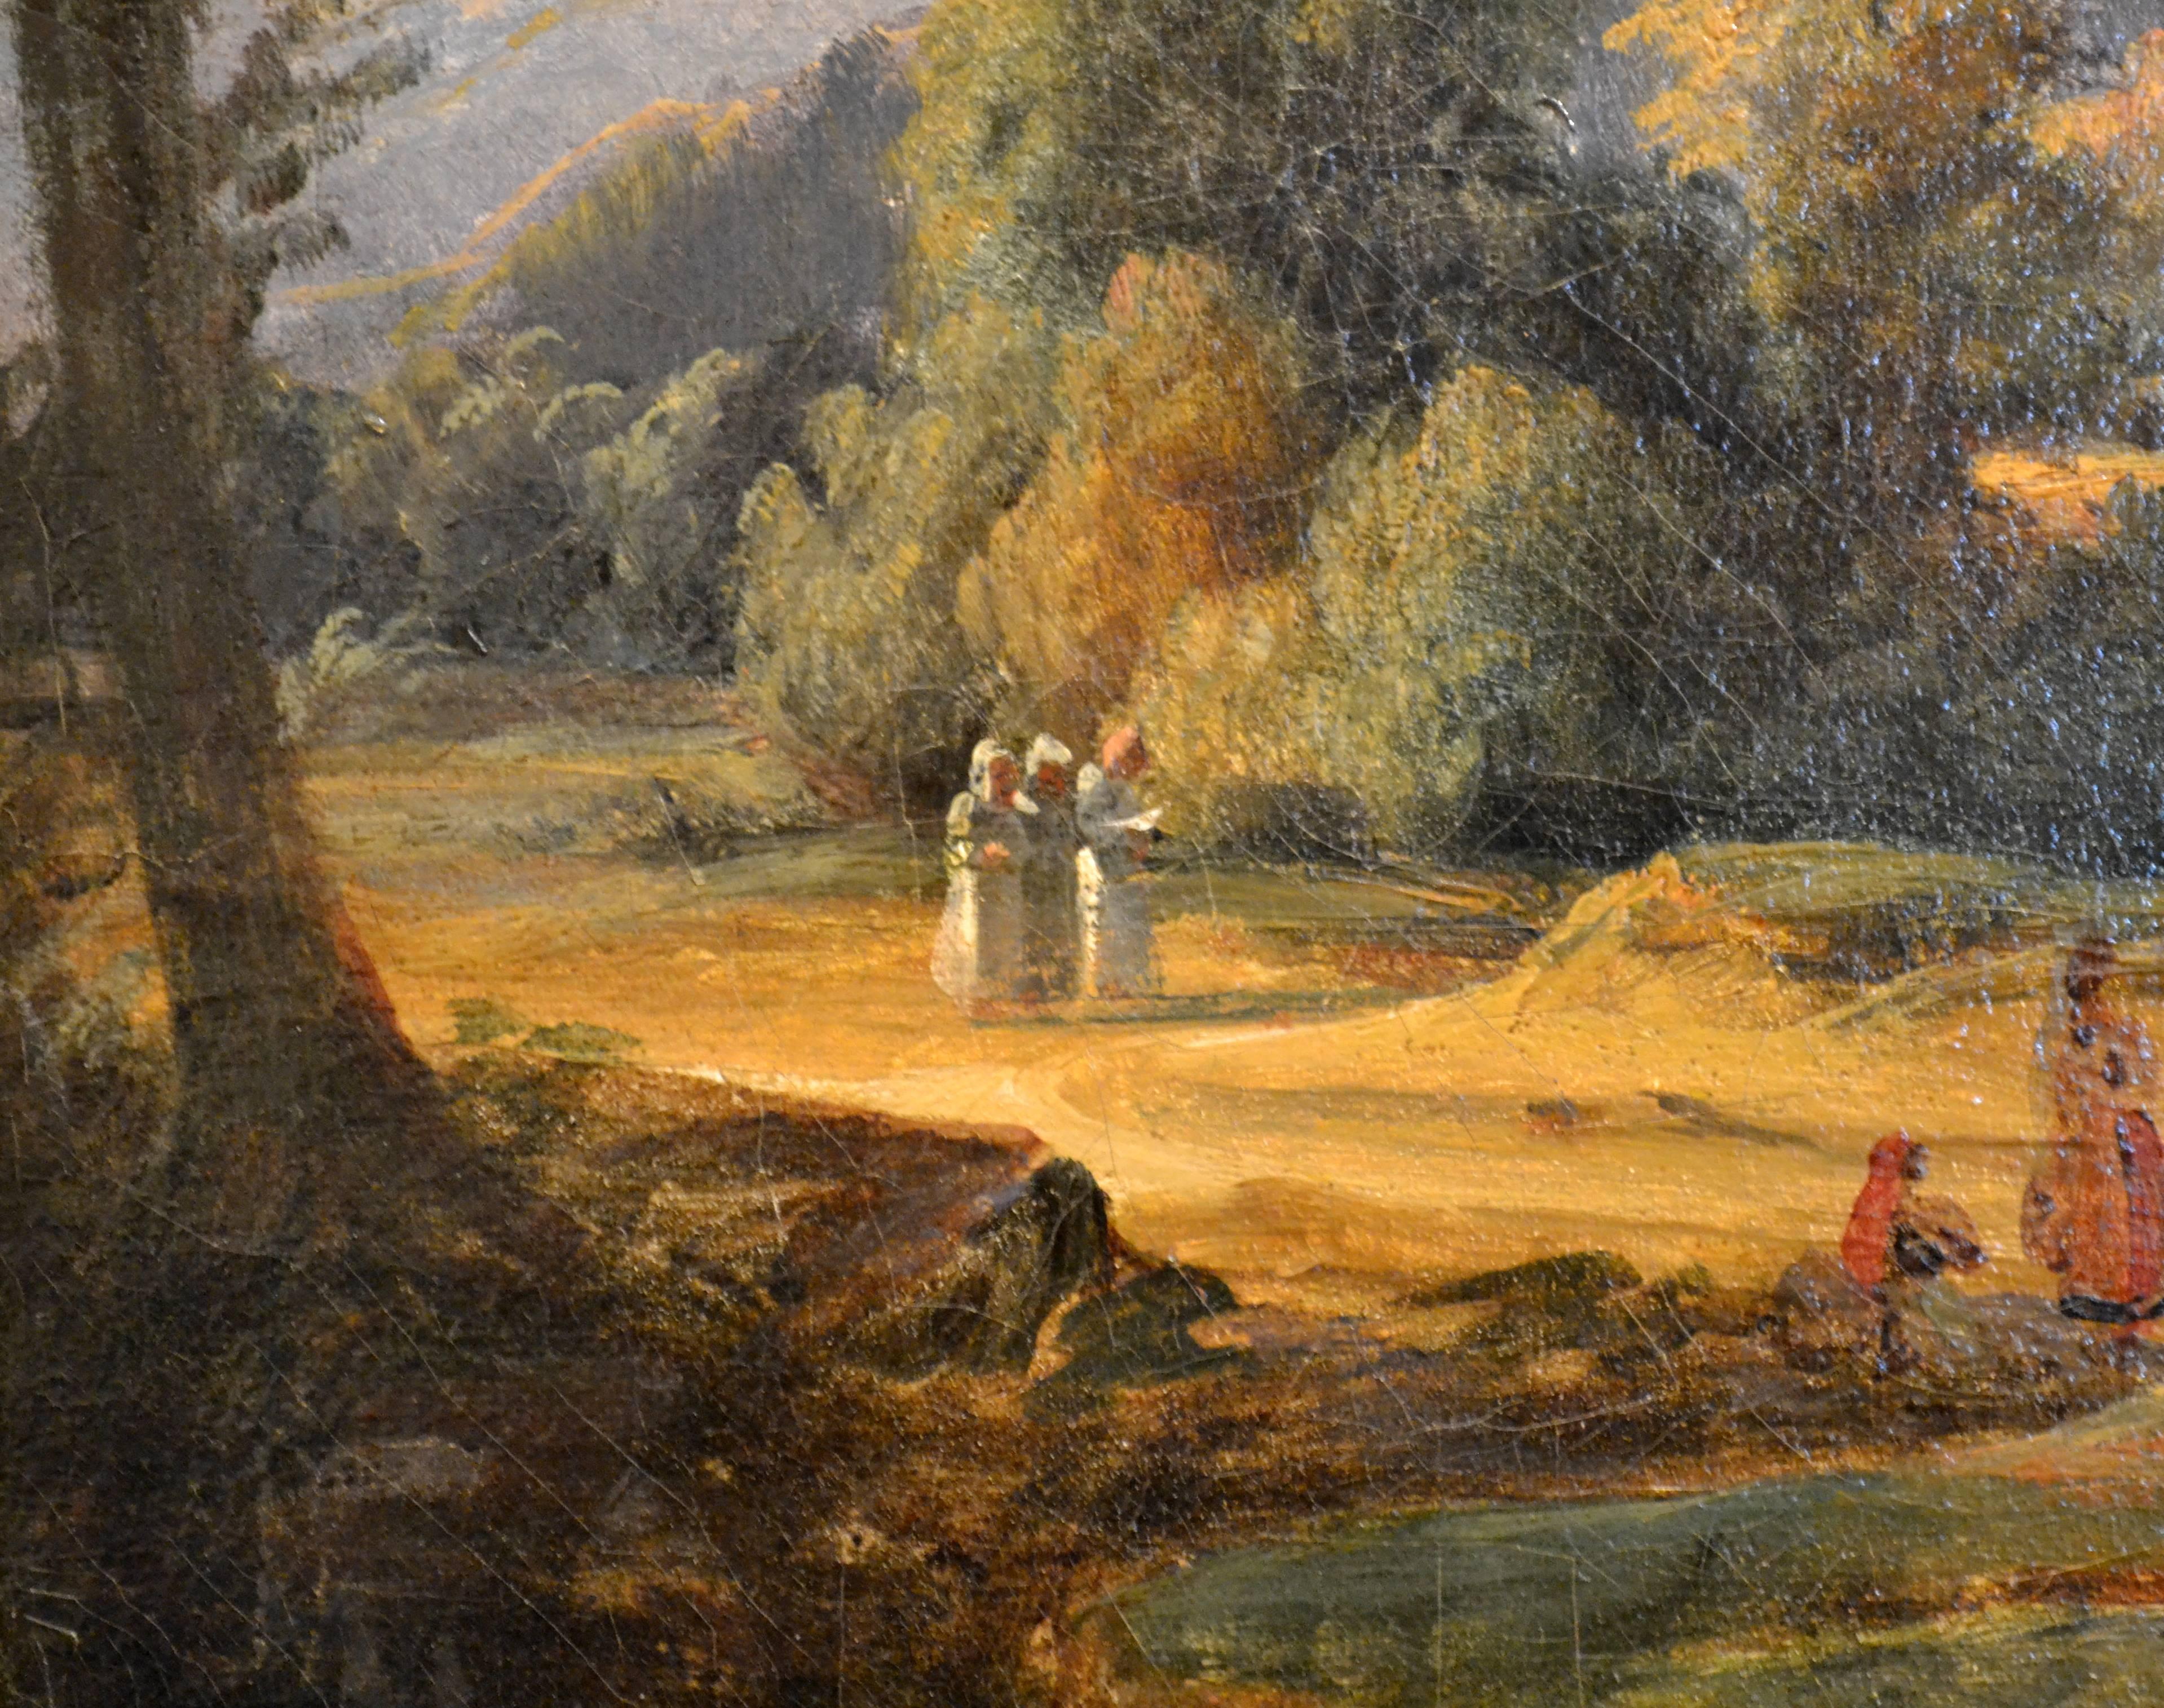 Mountain Landscape with Animals and Figures - Academic Painting by Unknown